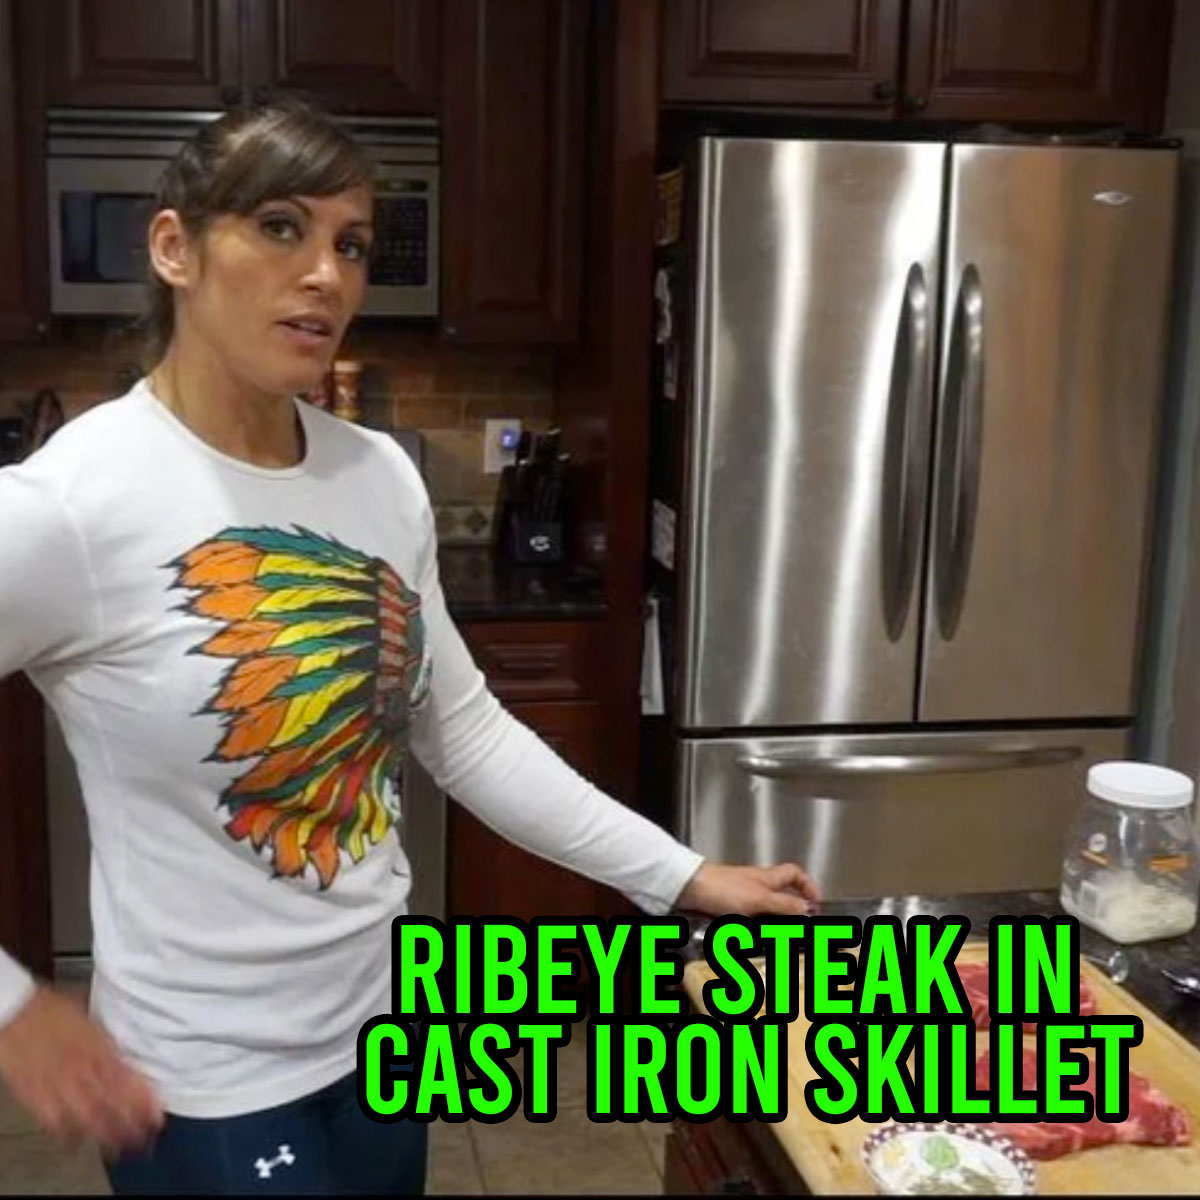 Cooking a Ribeye Steak in Cast Iron Skillet with Kristen Graham | Grill Your Ass Off